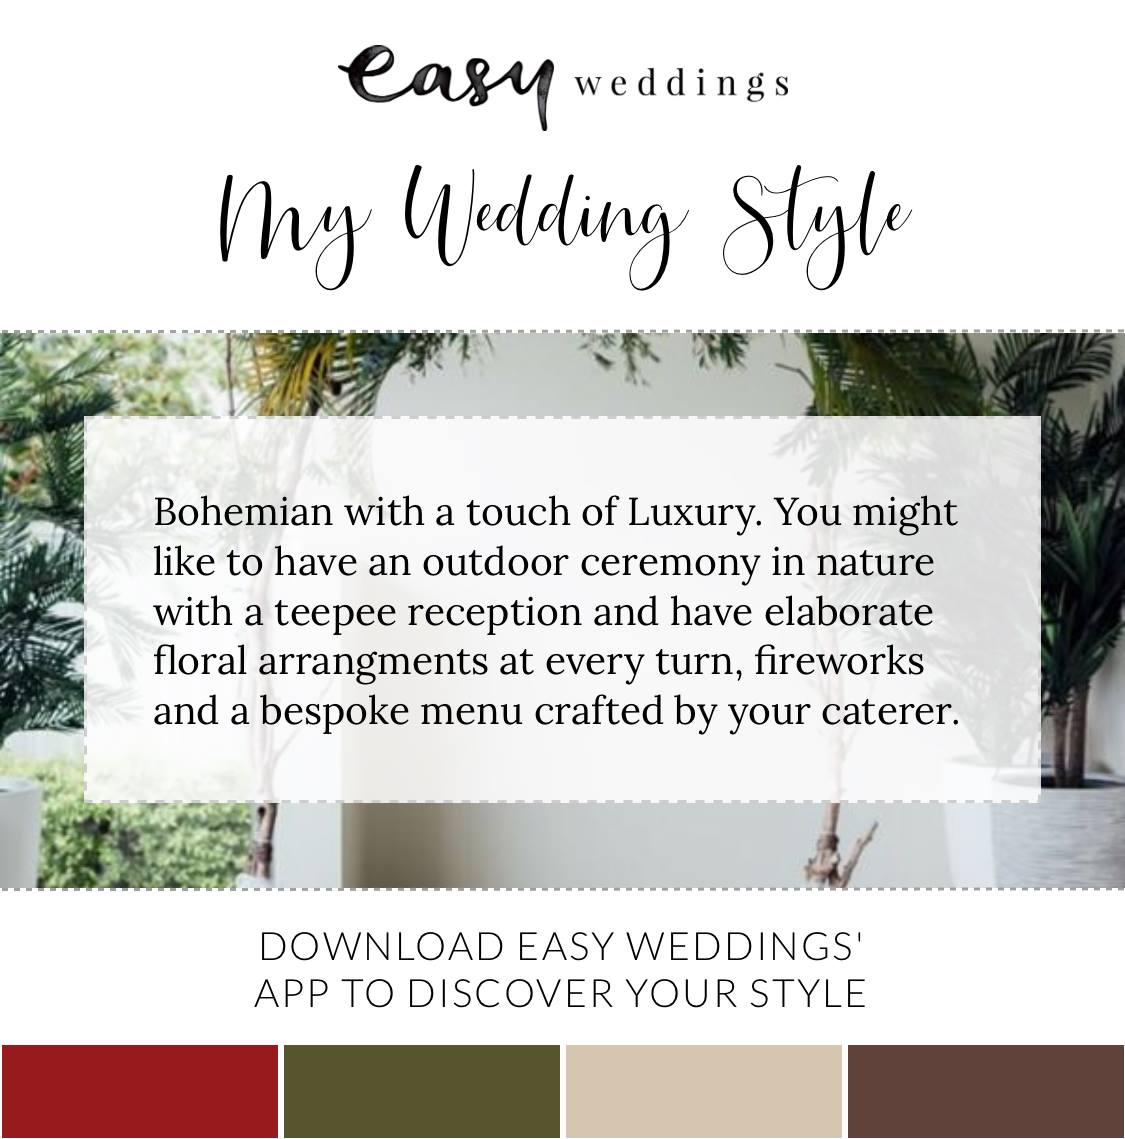 How To Find Your Wedding Style